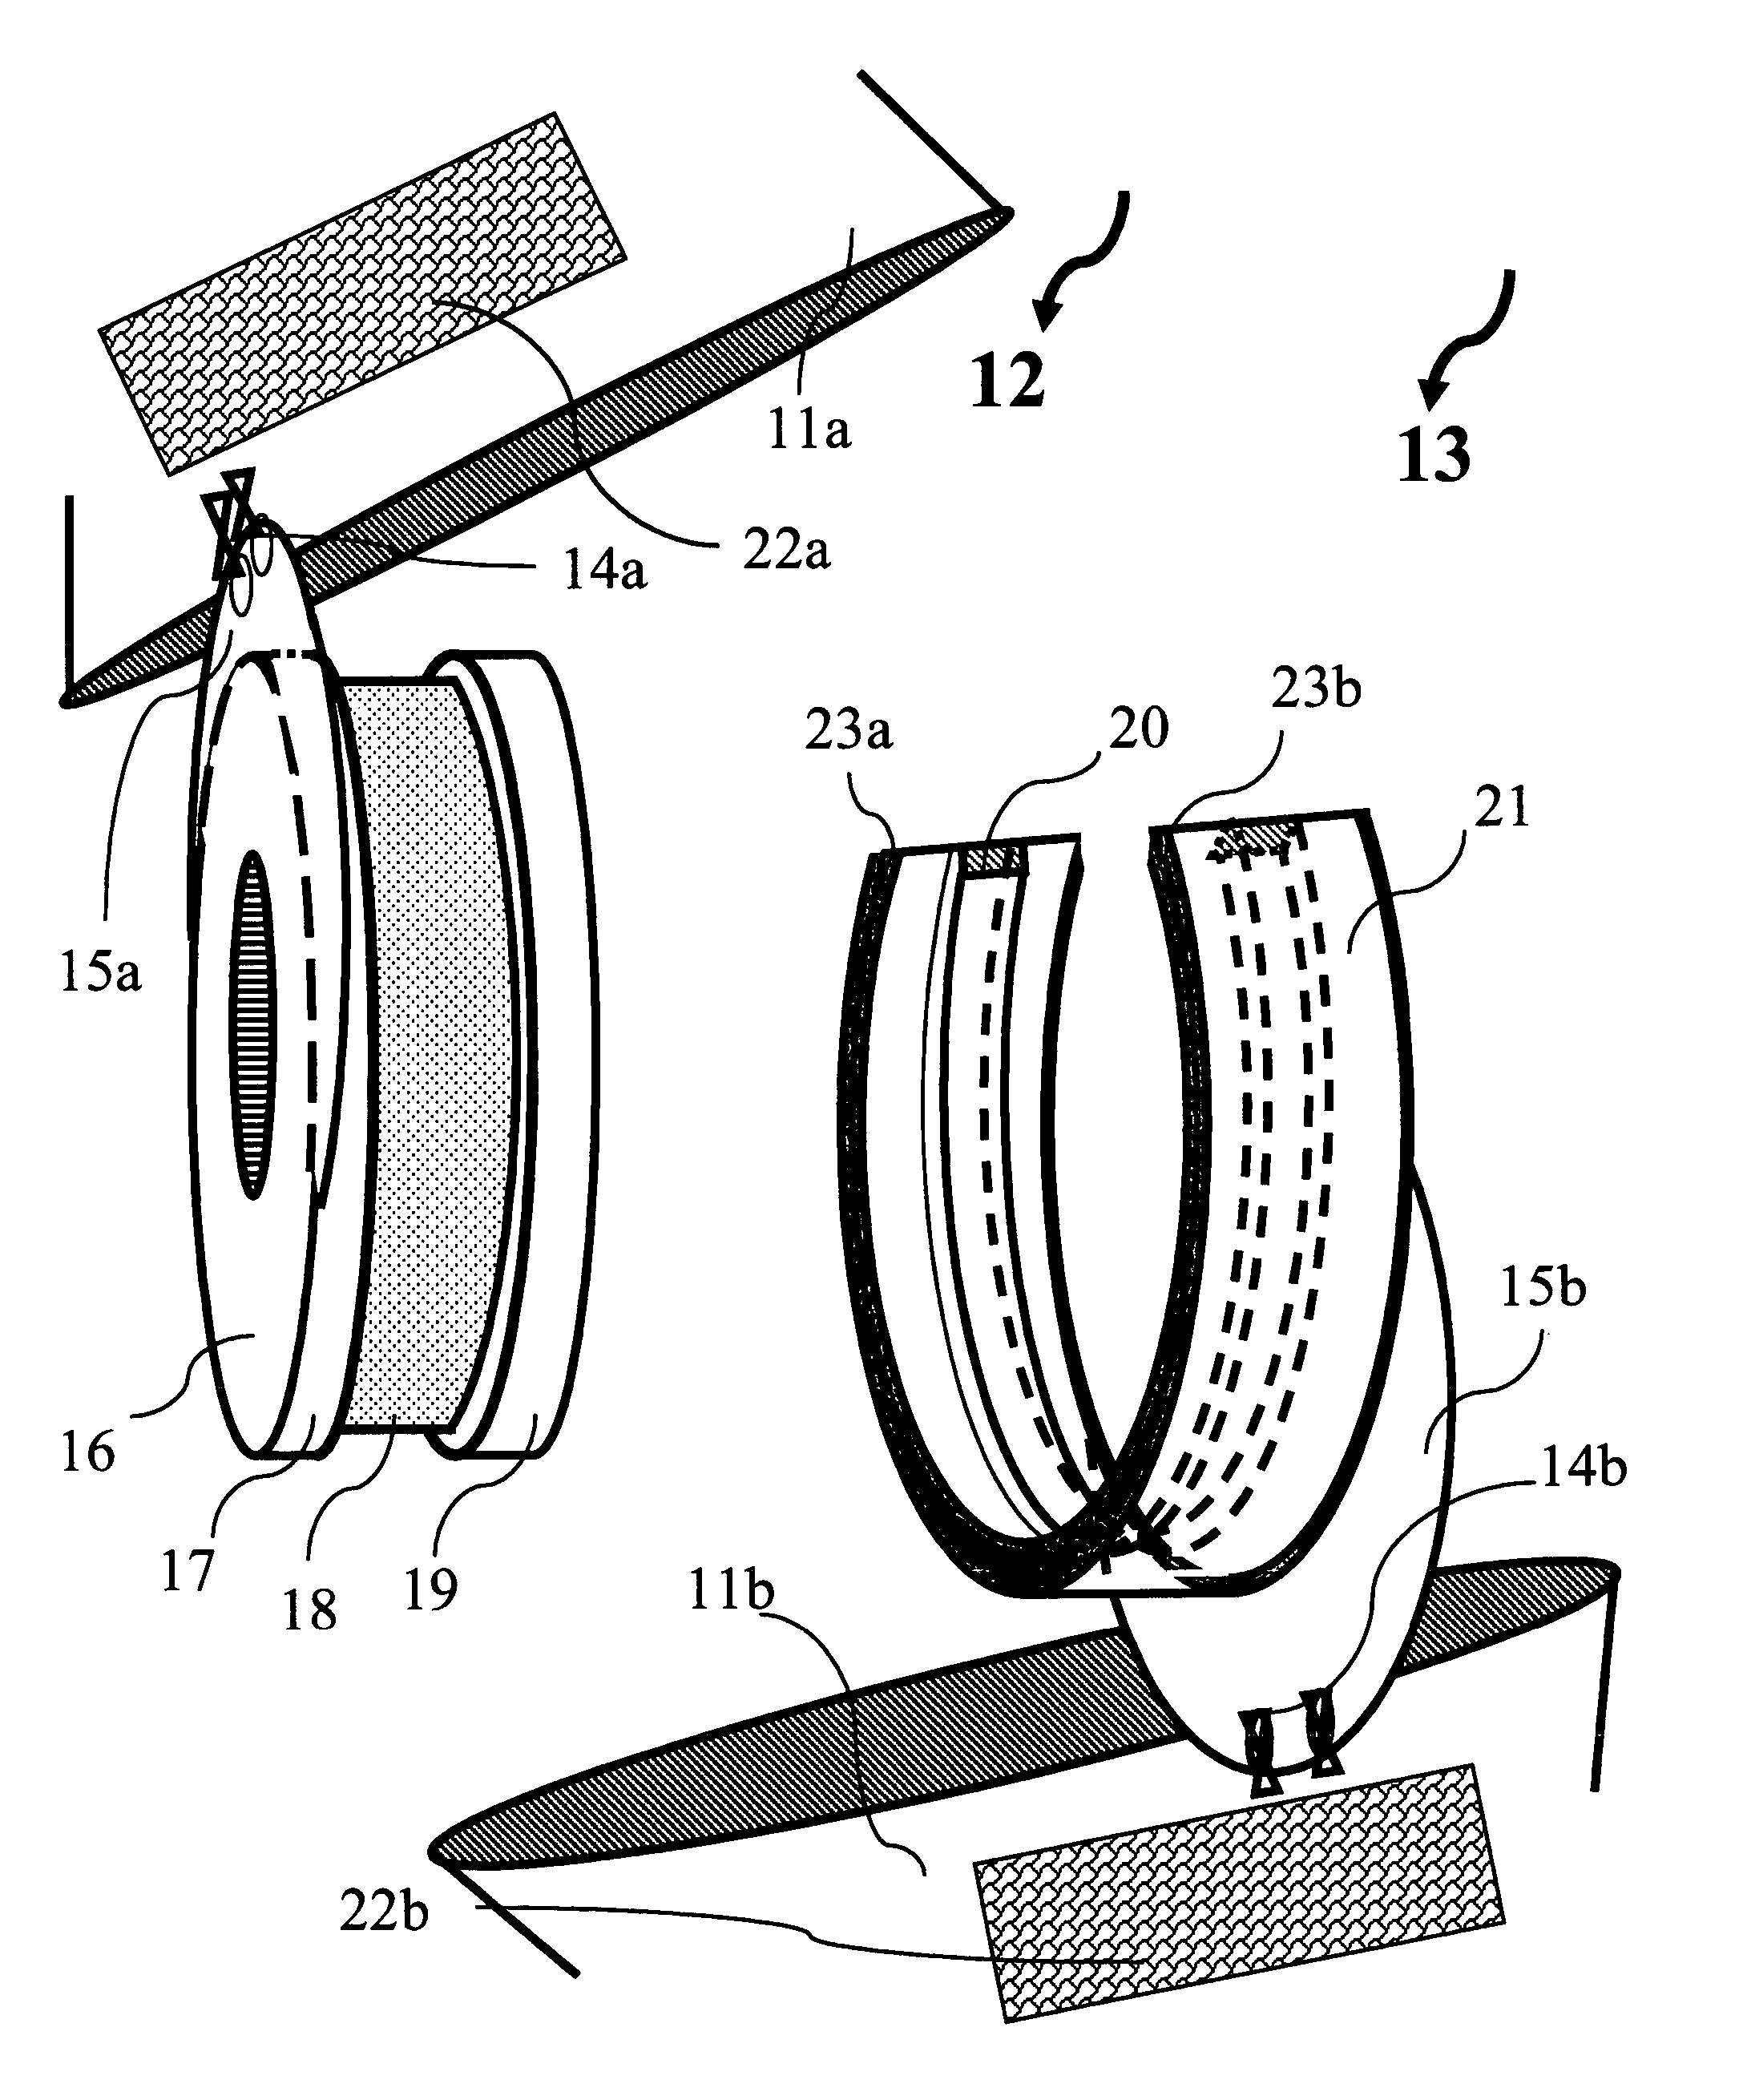 Fastener mechanism for uniting articles of clothing